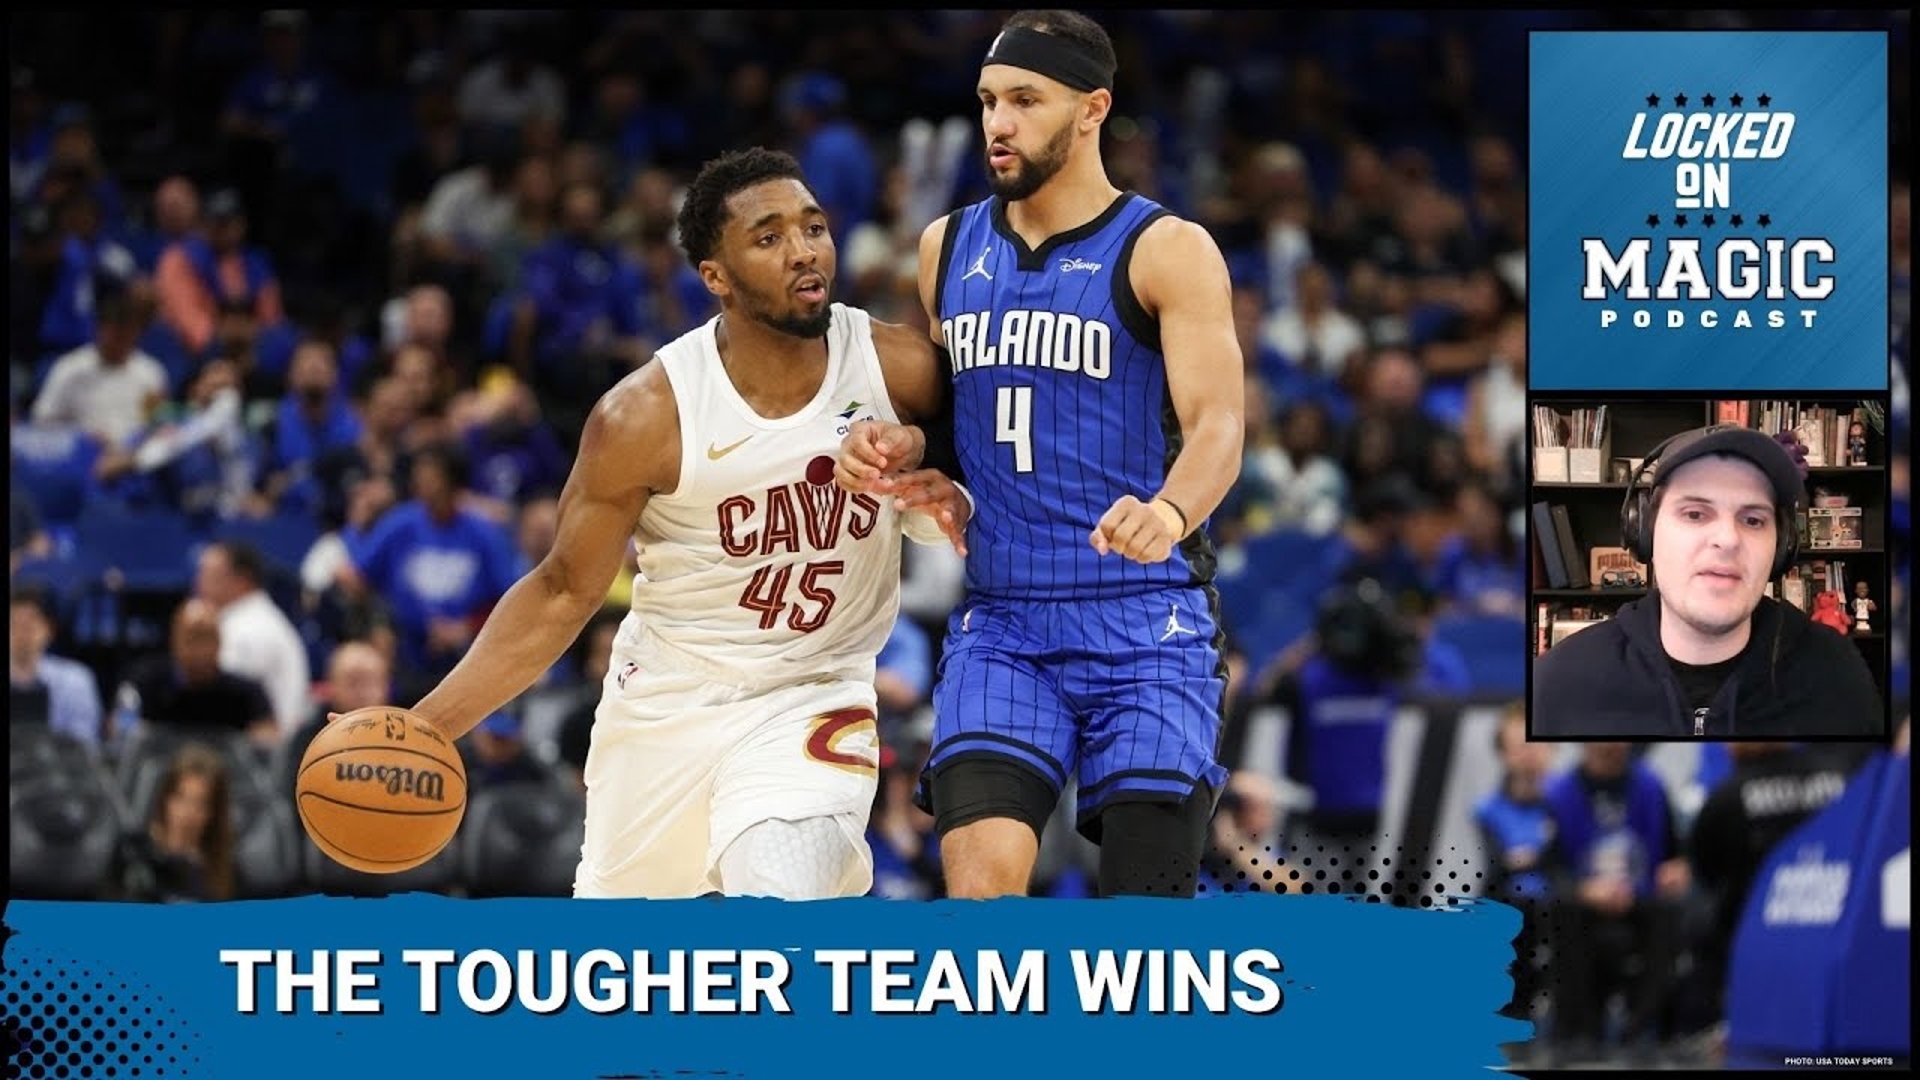 The Orlando Magic have evened their series with the Cleveland Cavaliers and head back to Cleveland seemingly in control. How they did it?